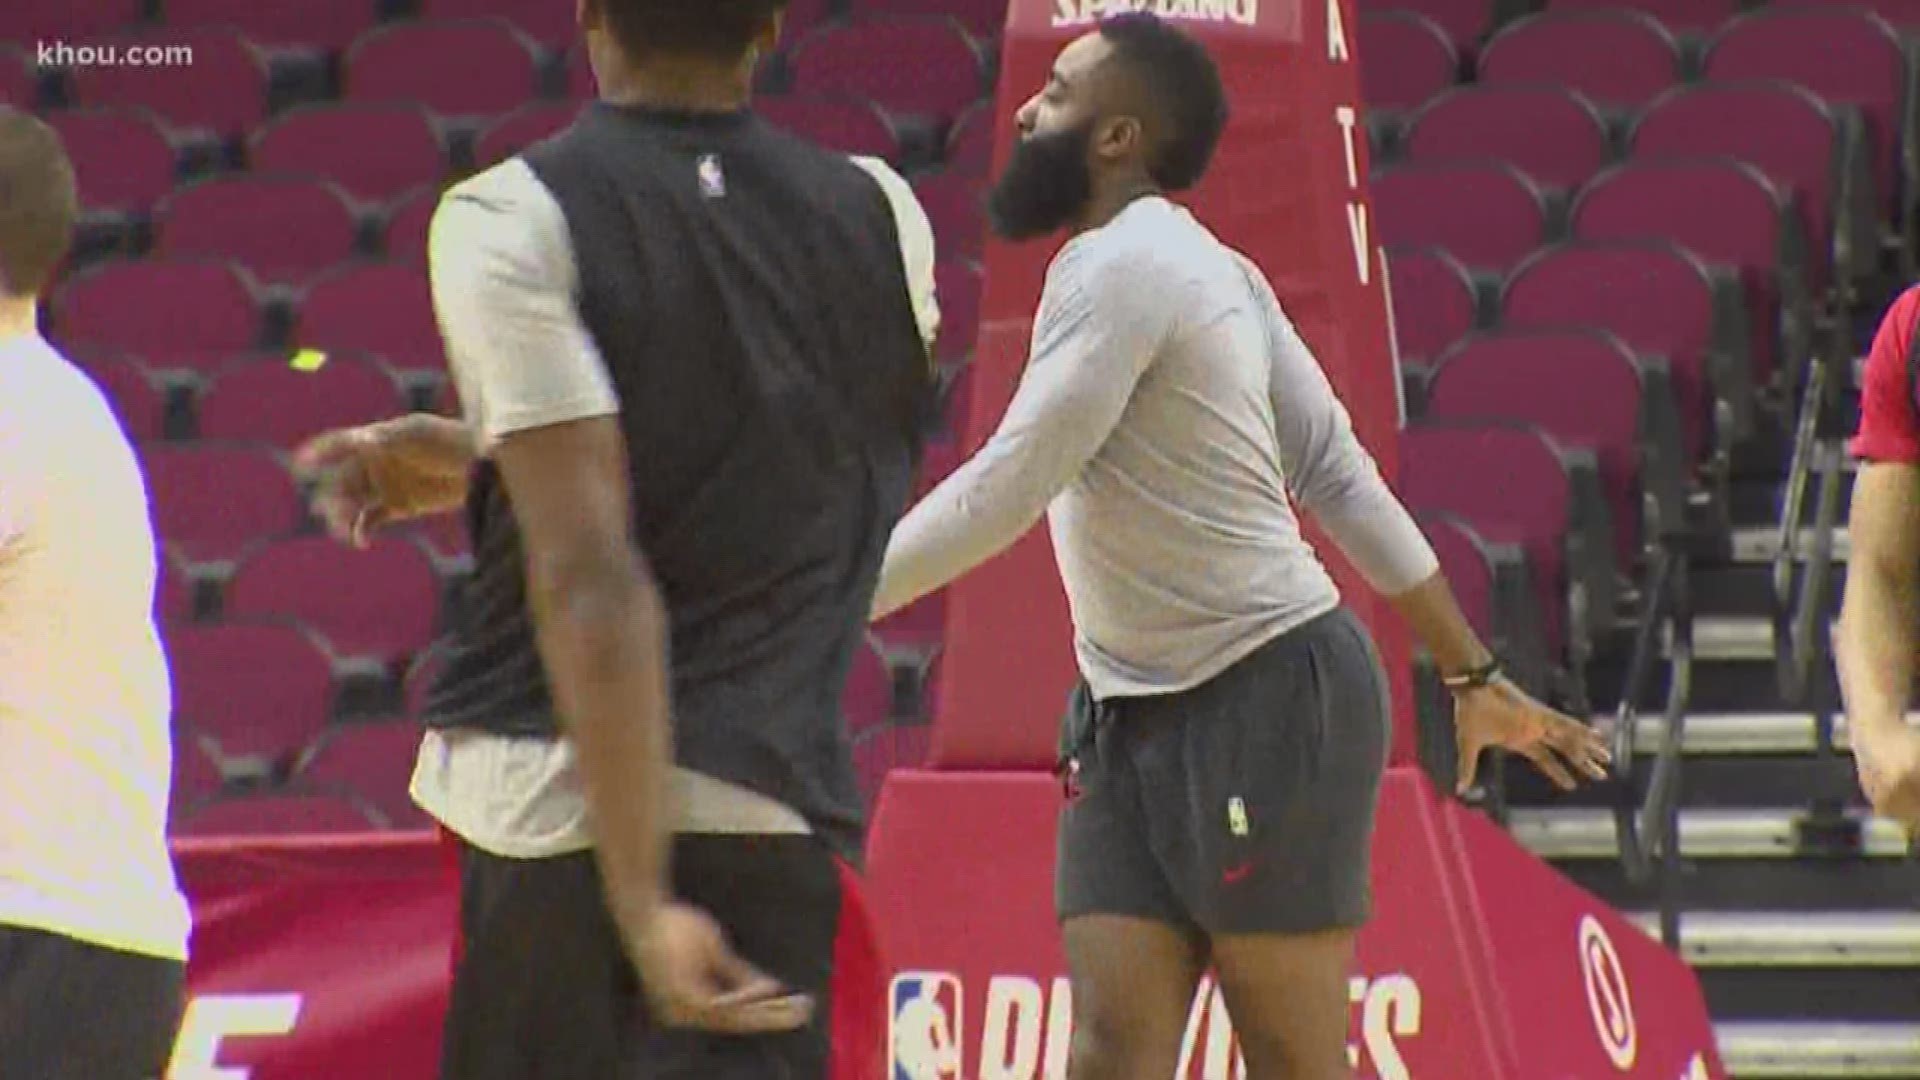 Houston Rockets guard James Harden was back at practice Thursday after suffering an eye injury in Game 2 of the Western Conference semifinals against the Golden State Warriors.